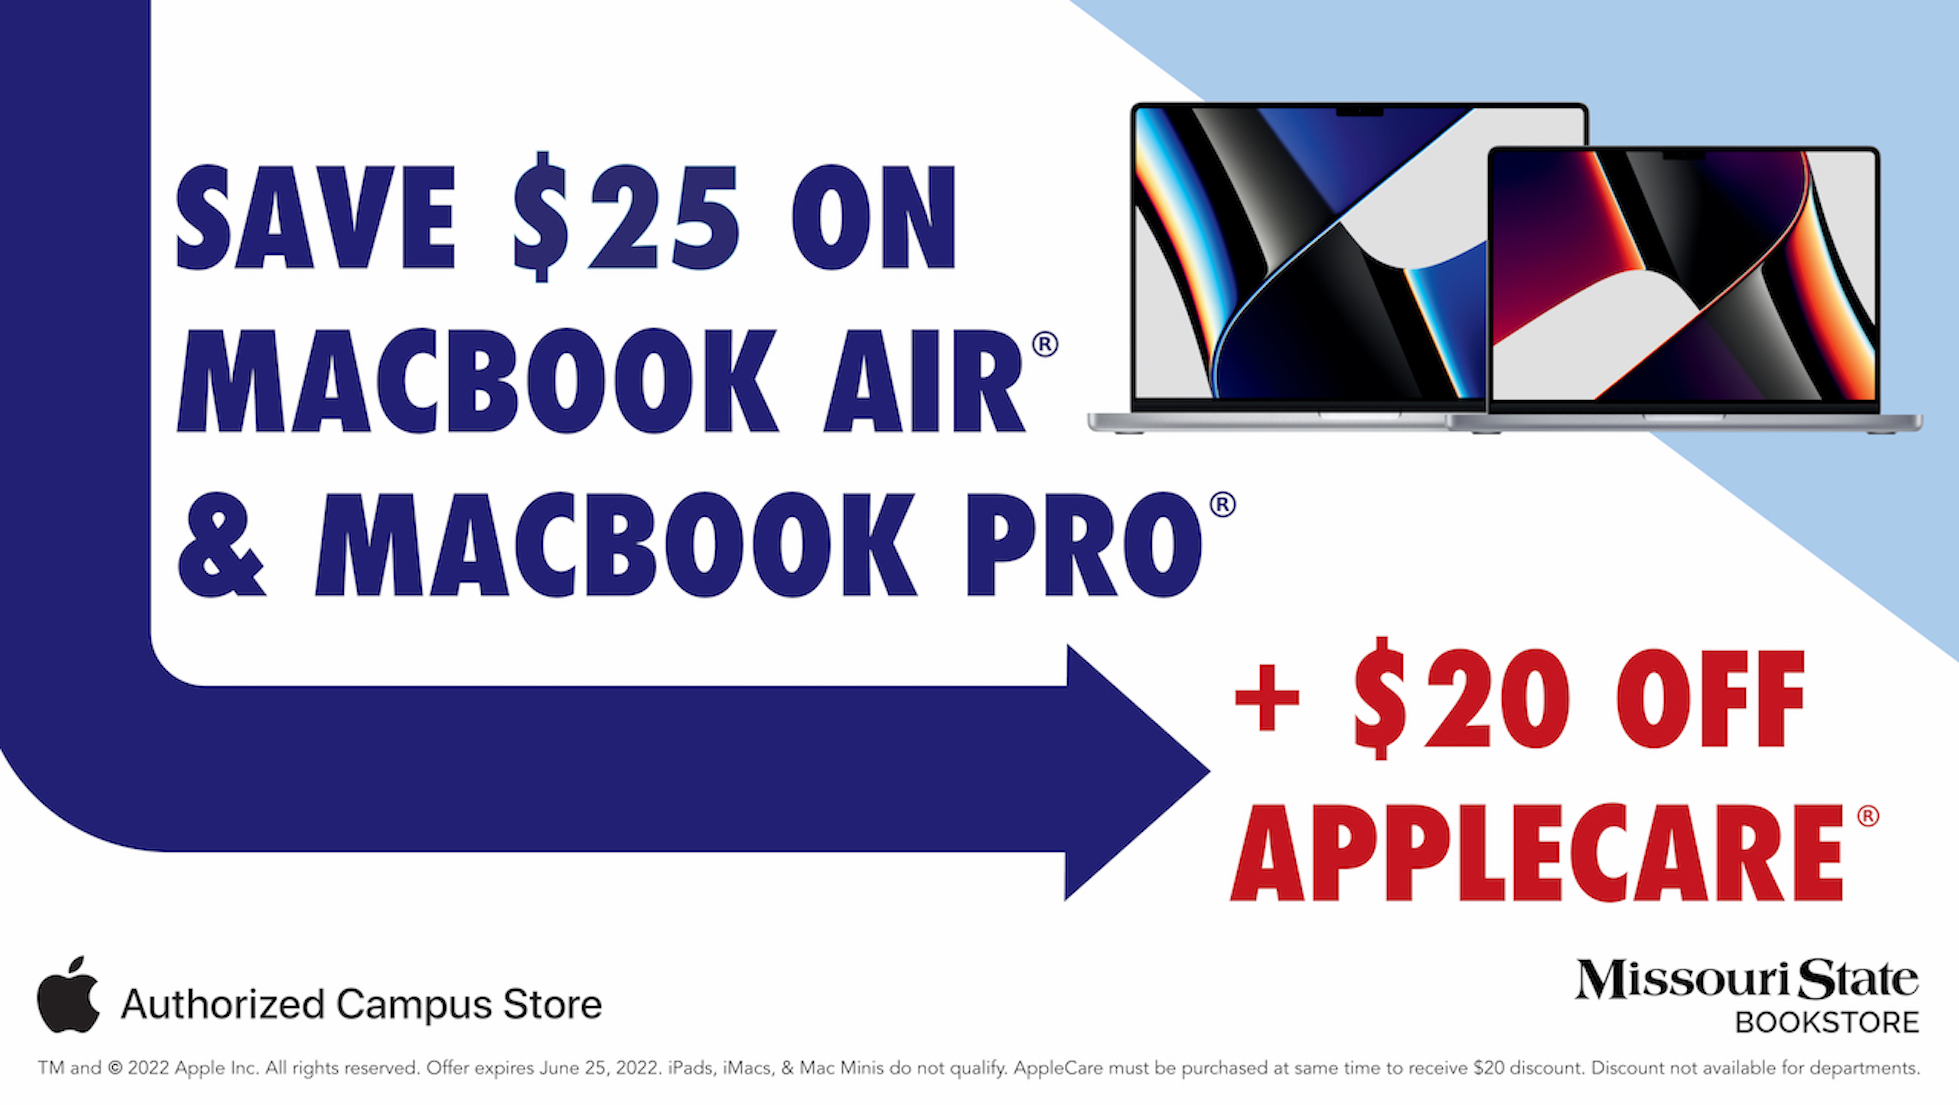 get $25 off select Apple MacBook air and MacBook Pro in-store and online now, plus $20 off AppleCare